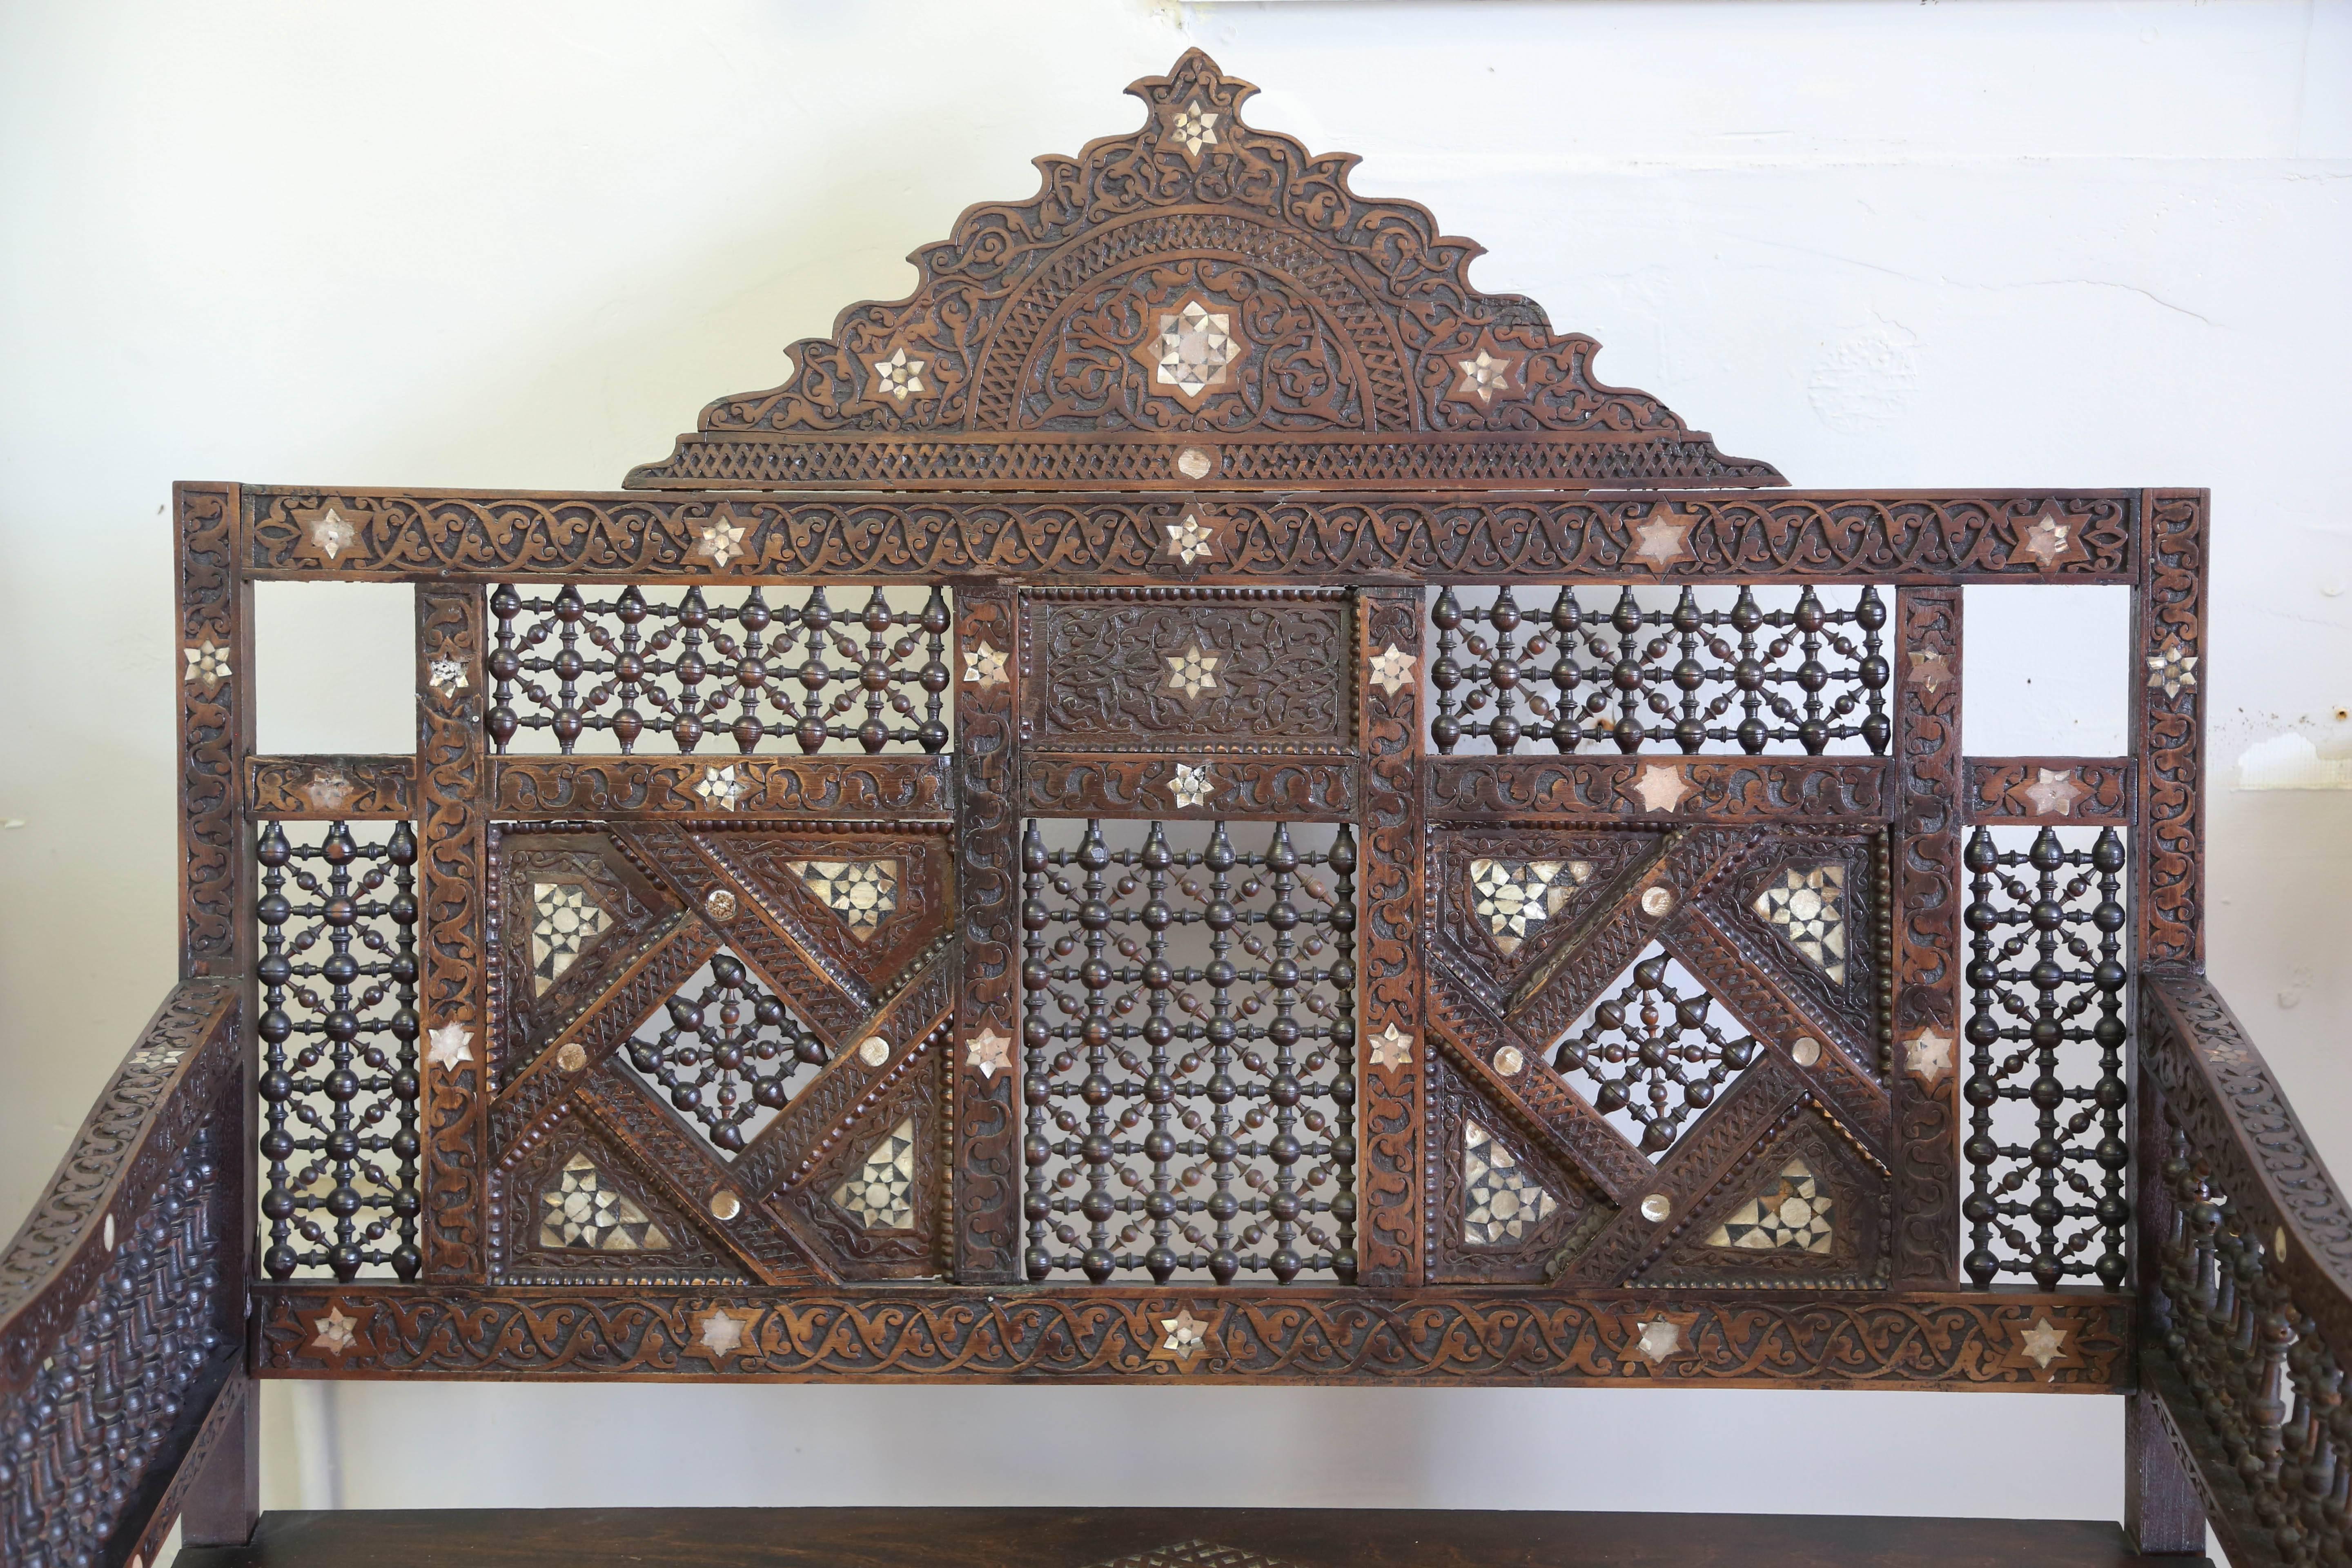 19th century Syrian carved inlaid bench with plenty of details. Great for entrance.